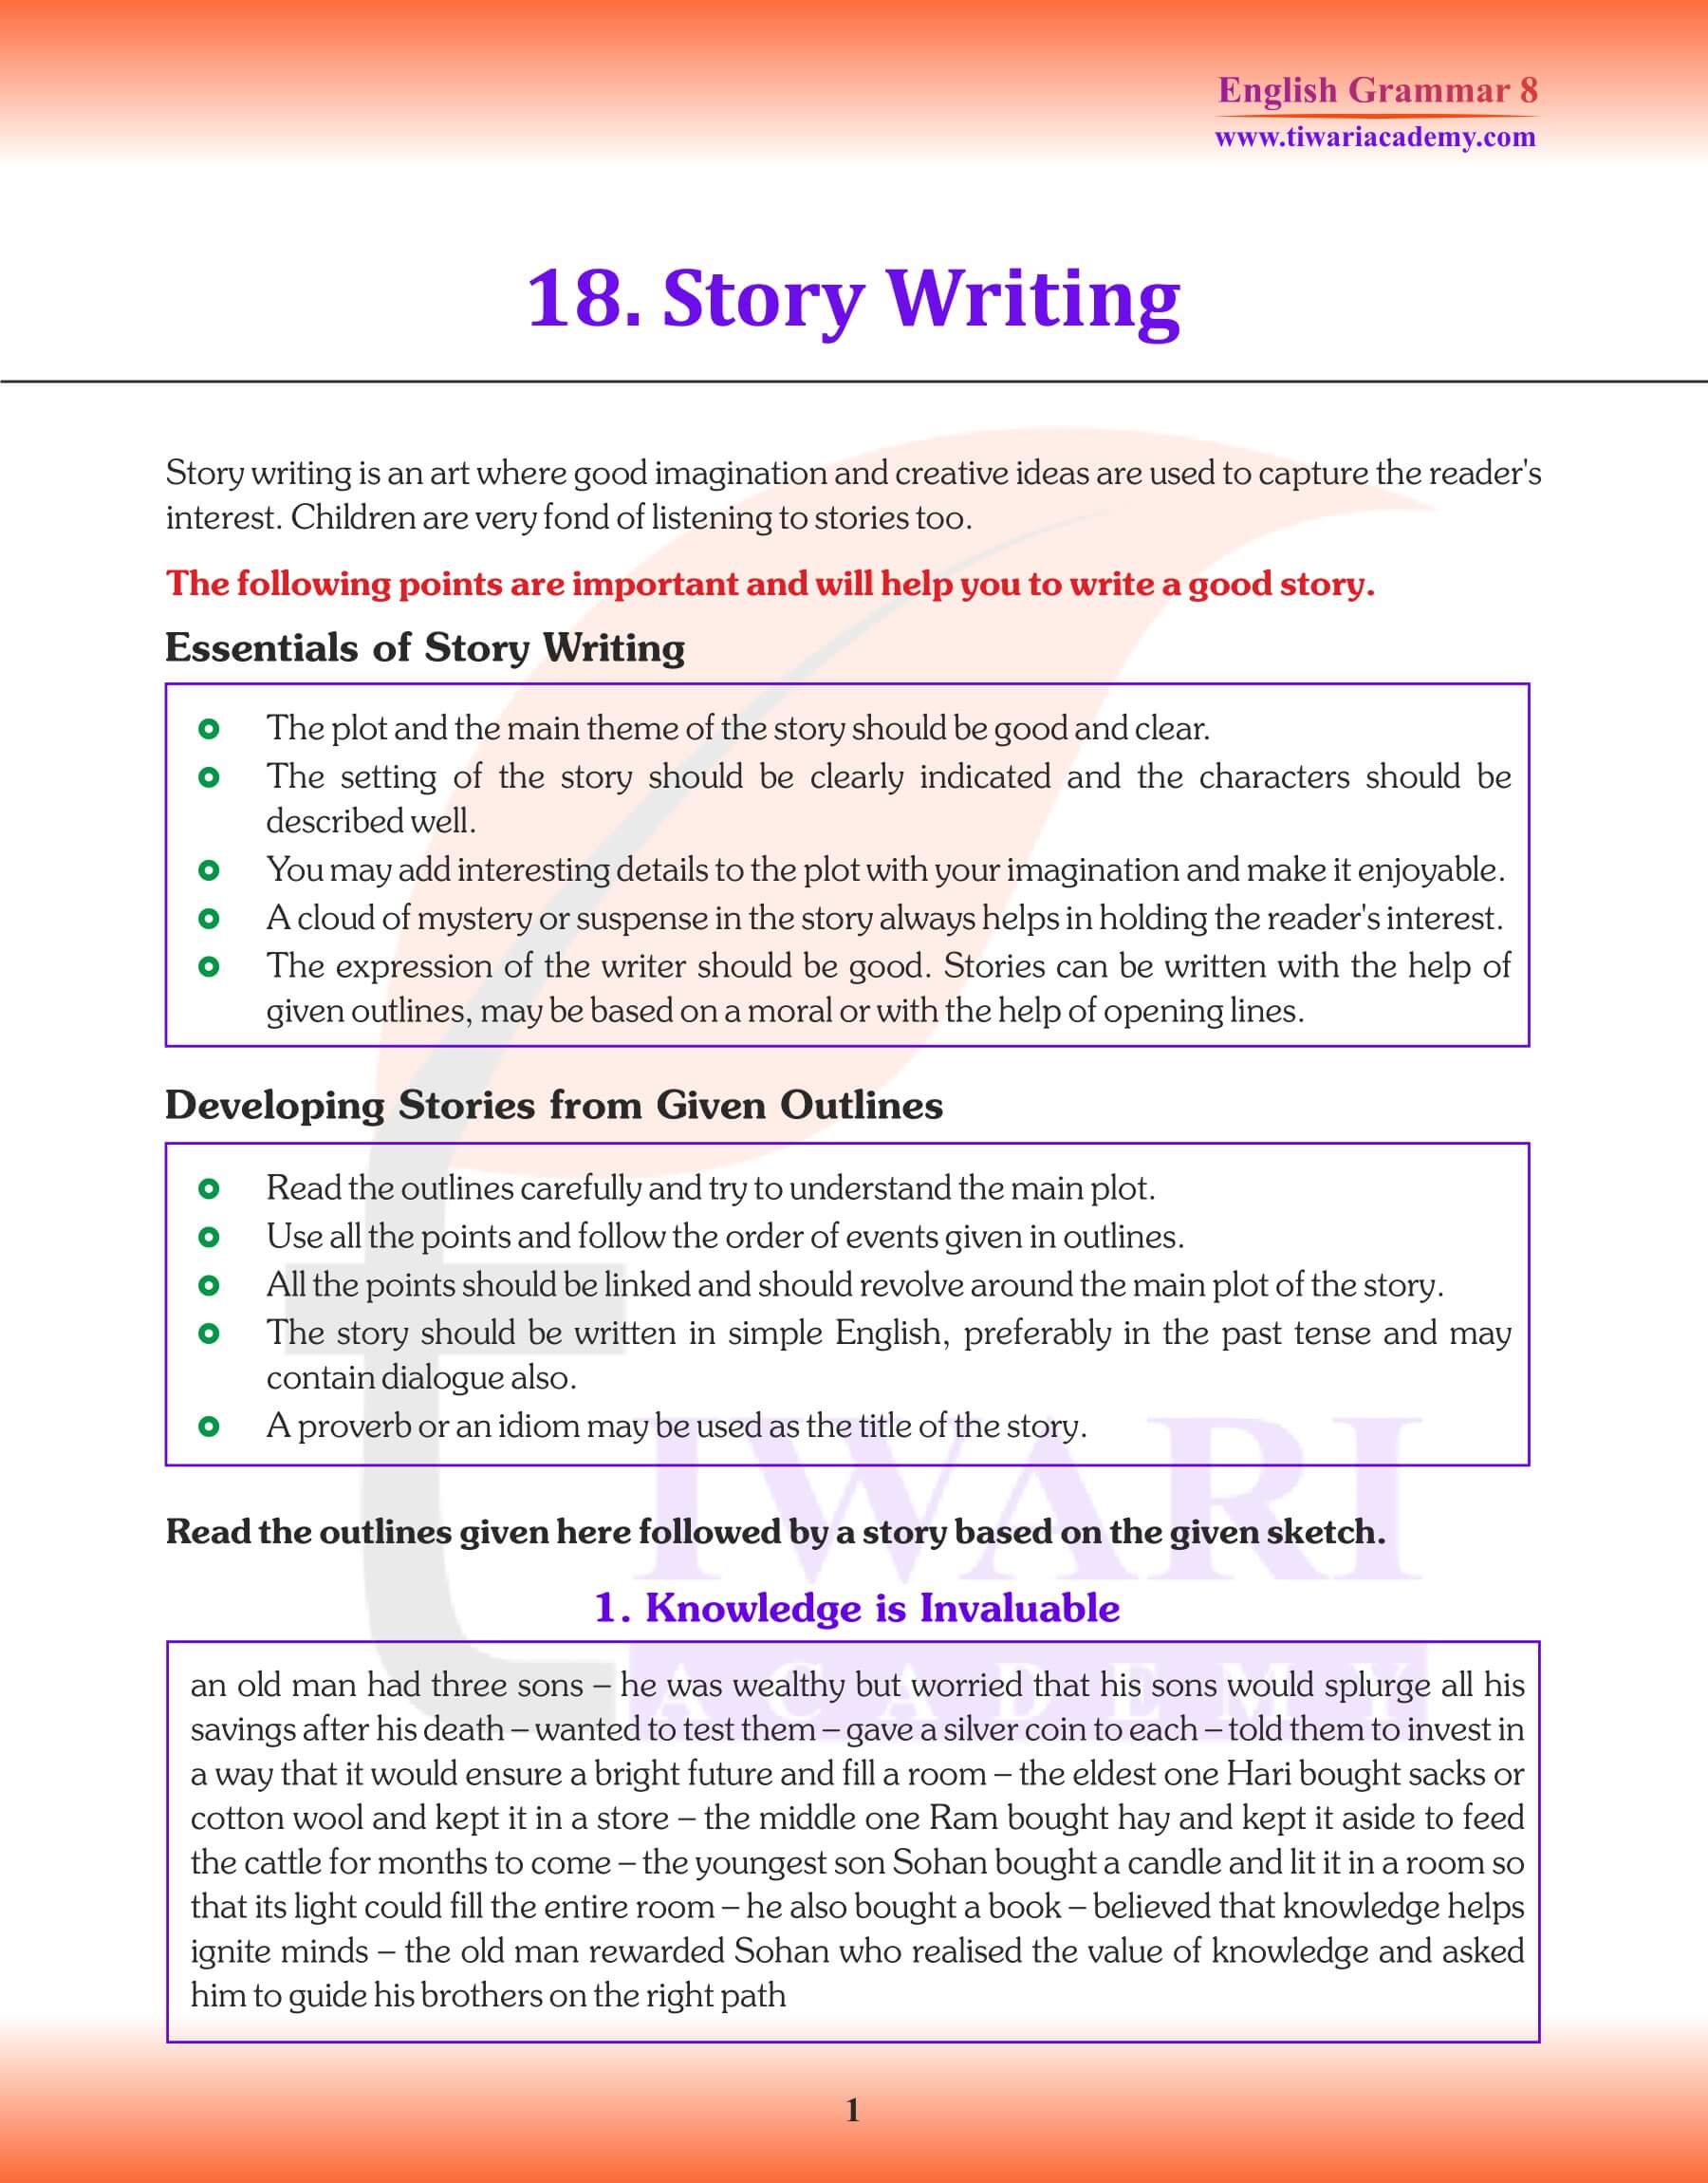 Class 8 English Grammar Story Writing Revision Book